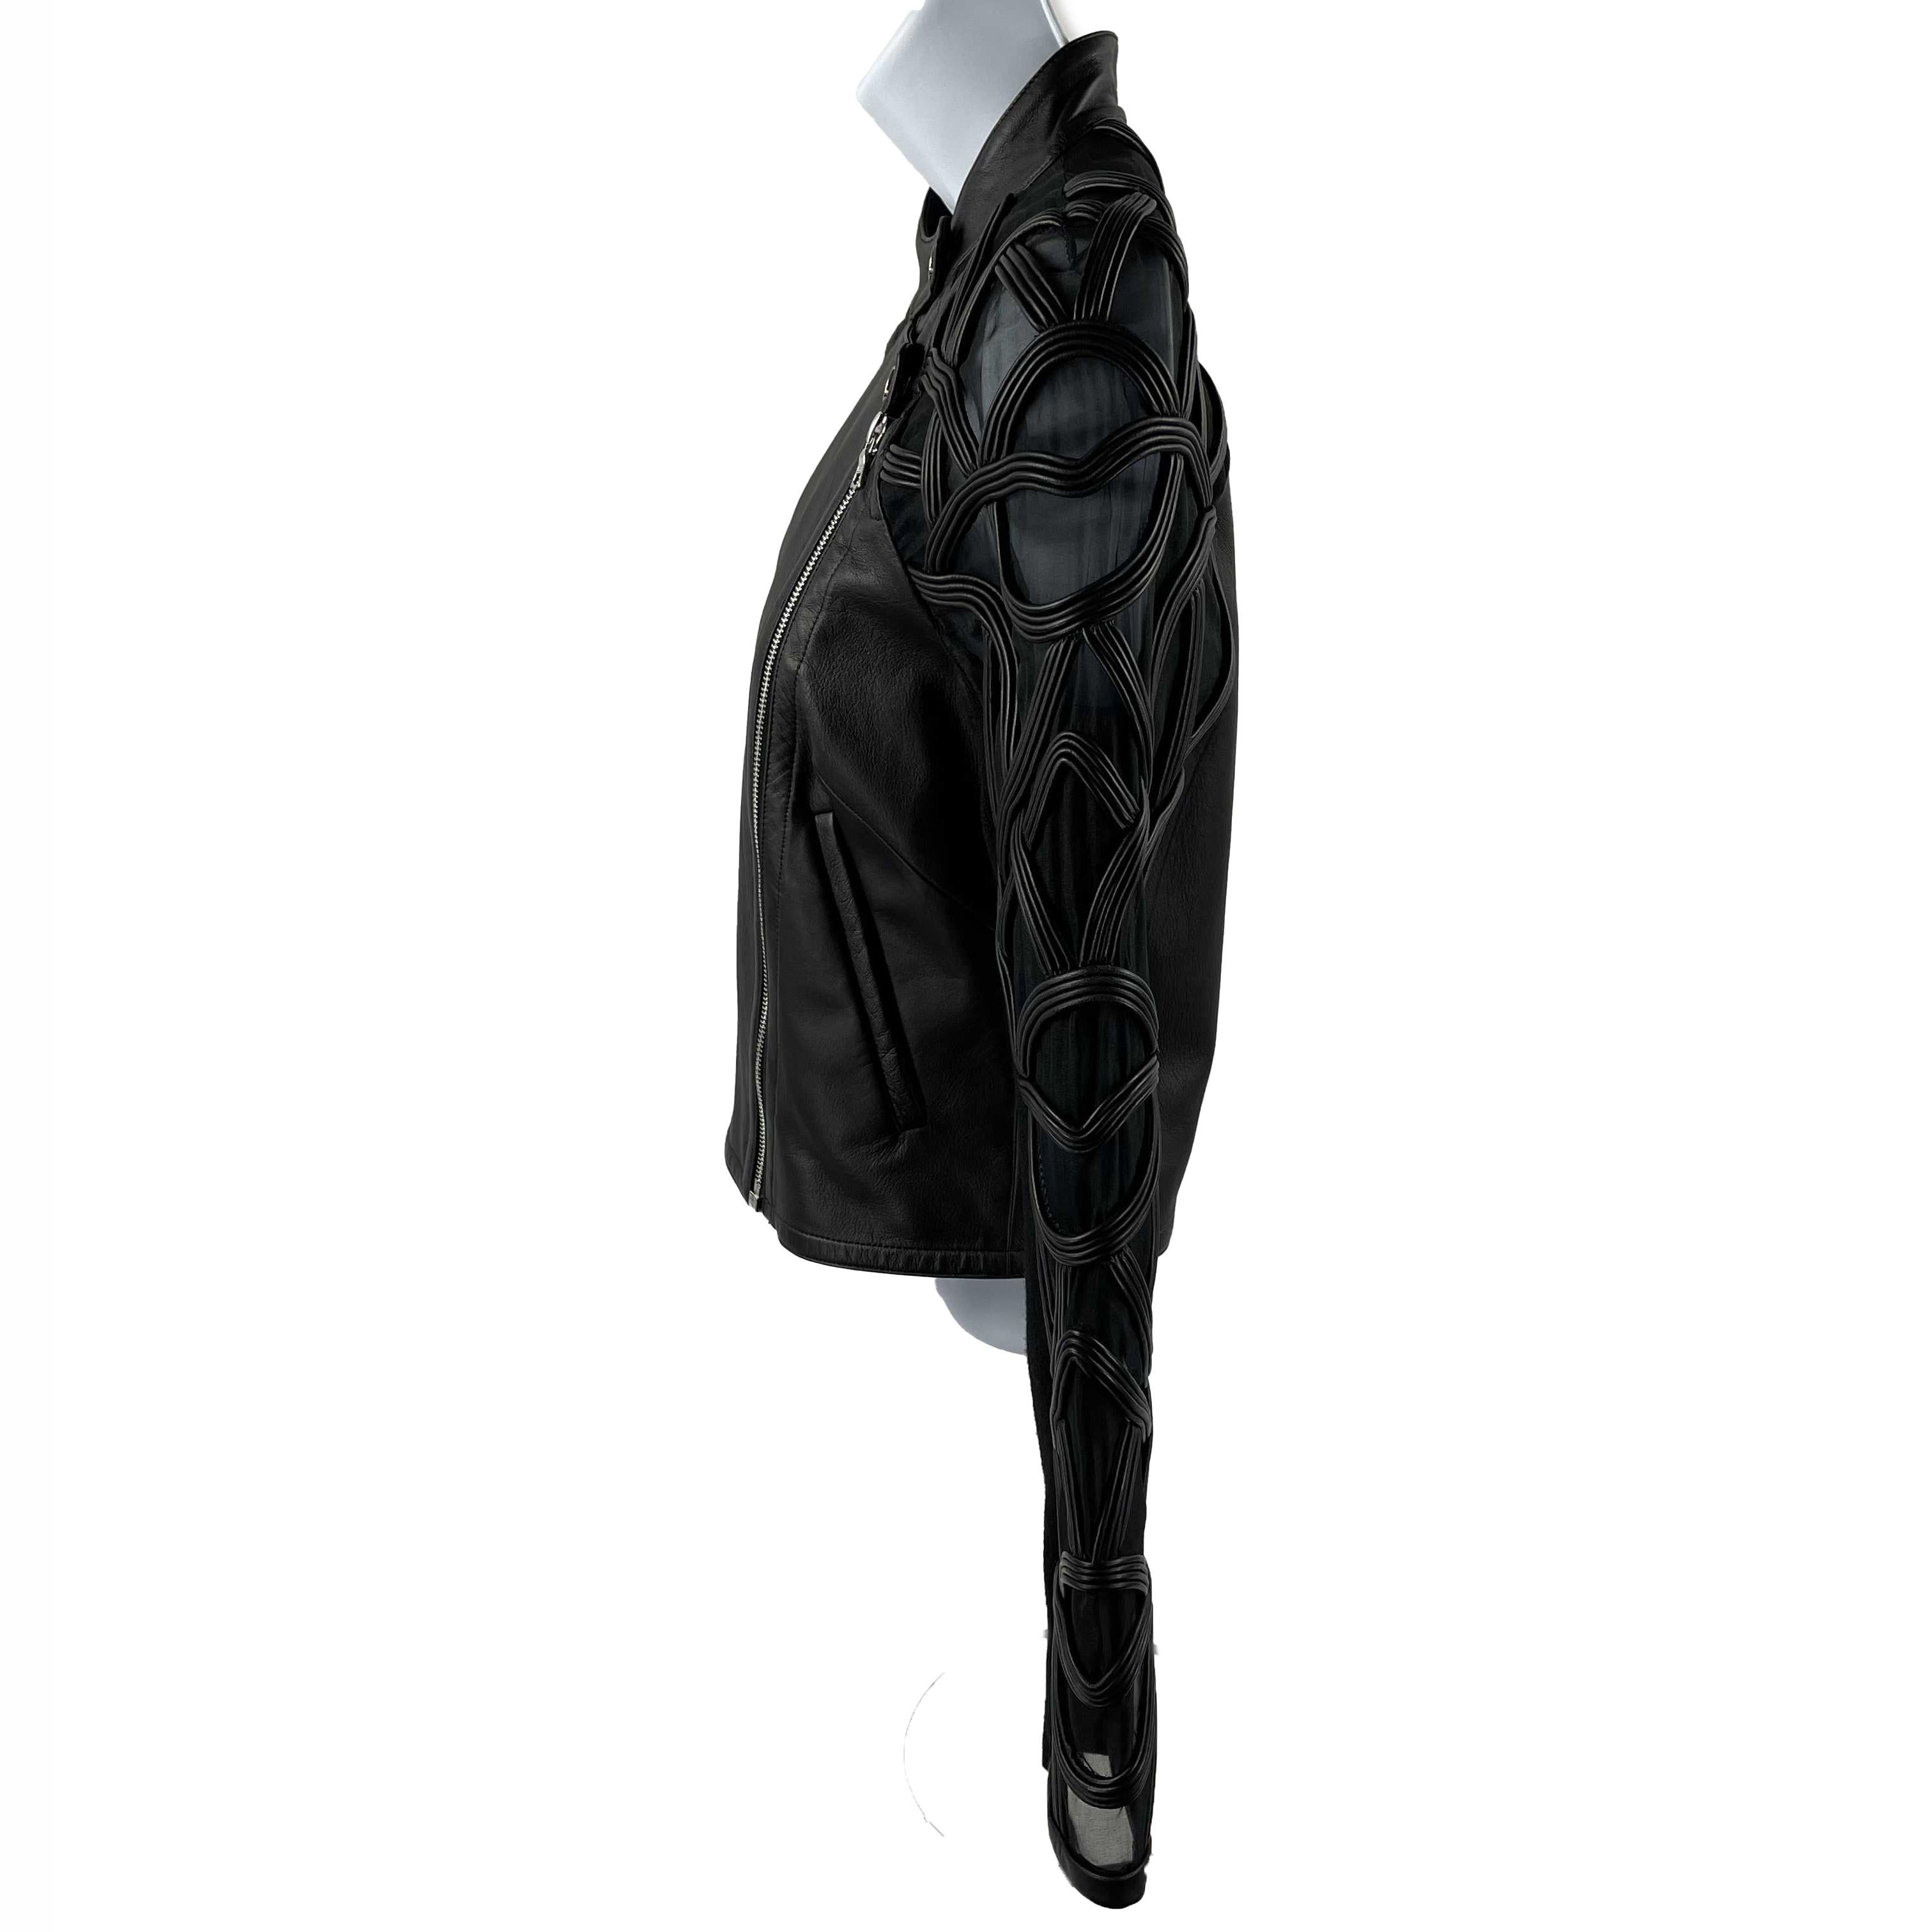 Noir Yigal Azrouël Sheer Embroidered Black Leather Moto Jacket 2 / XS